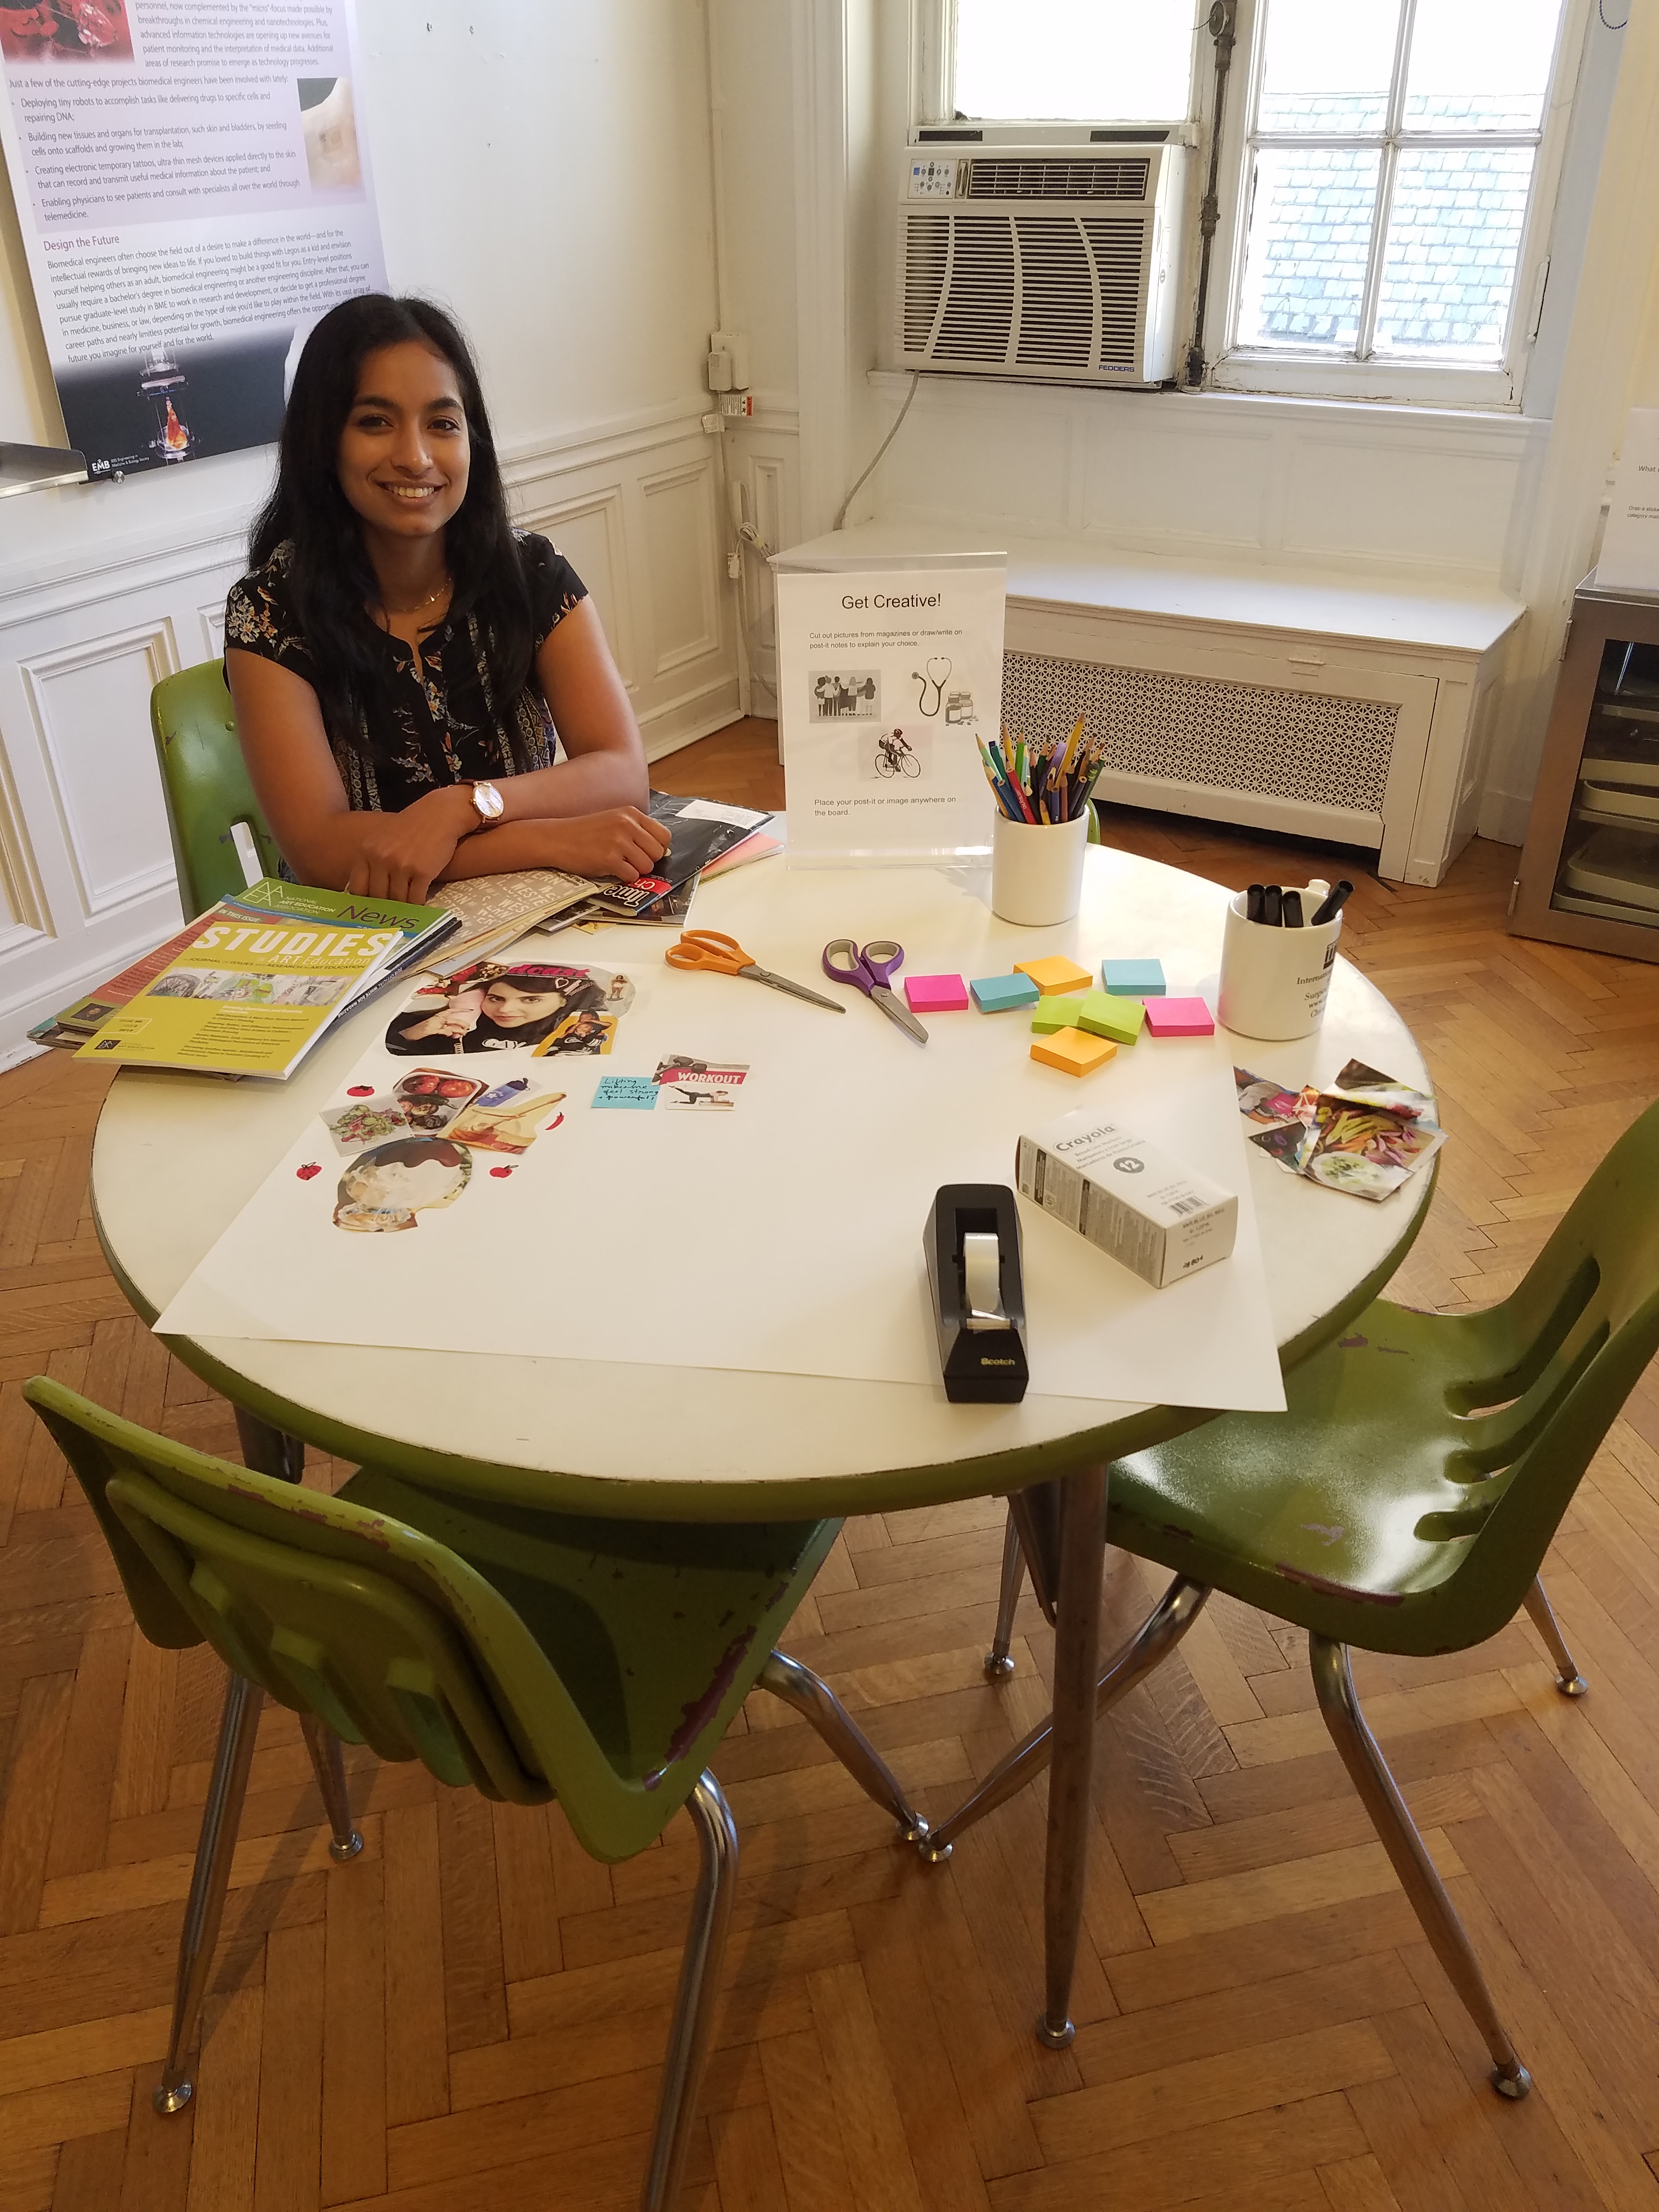 Anu sitting at a table with art supplies